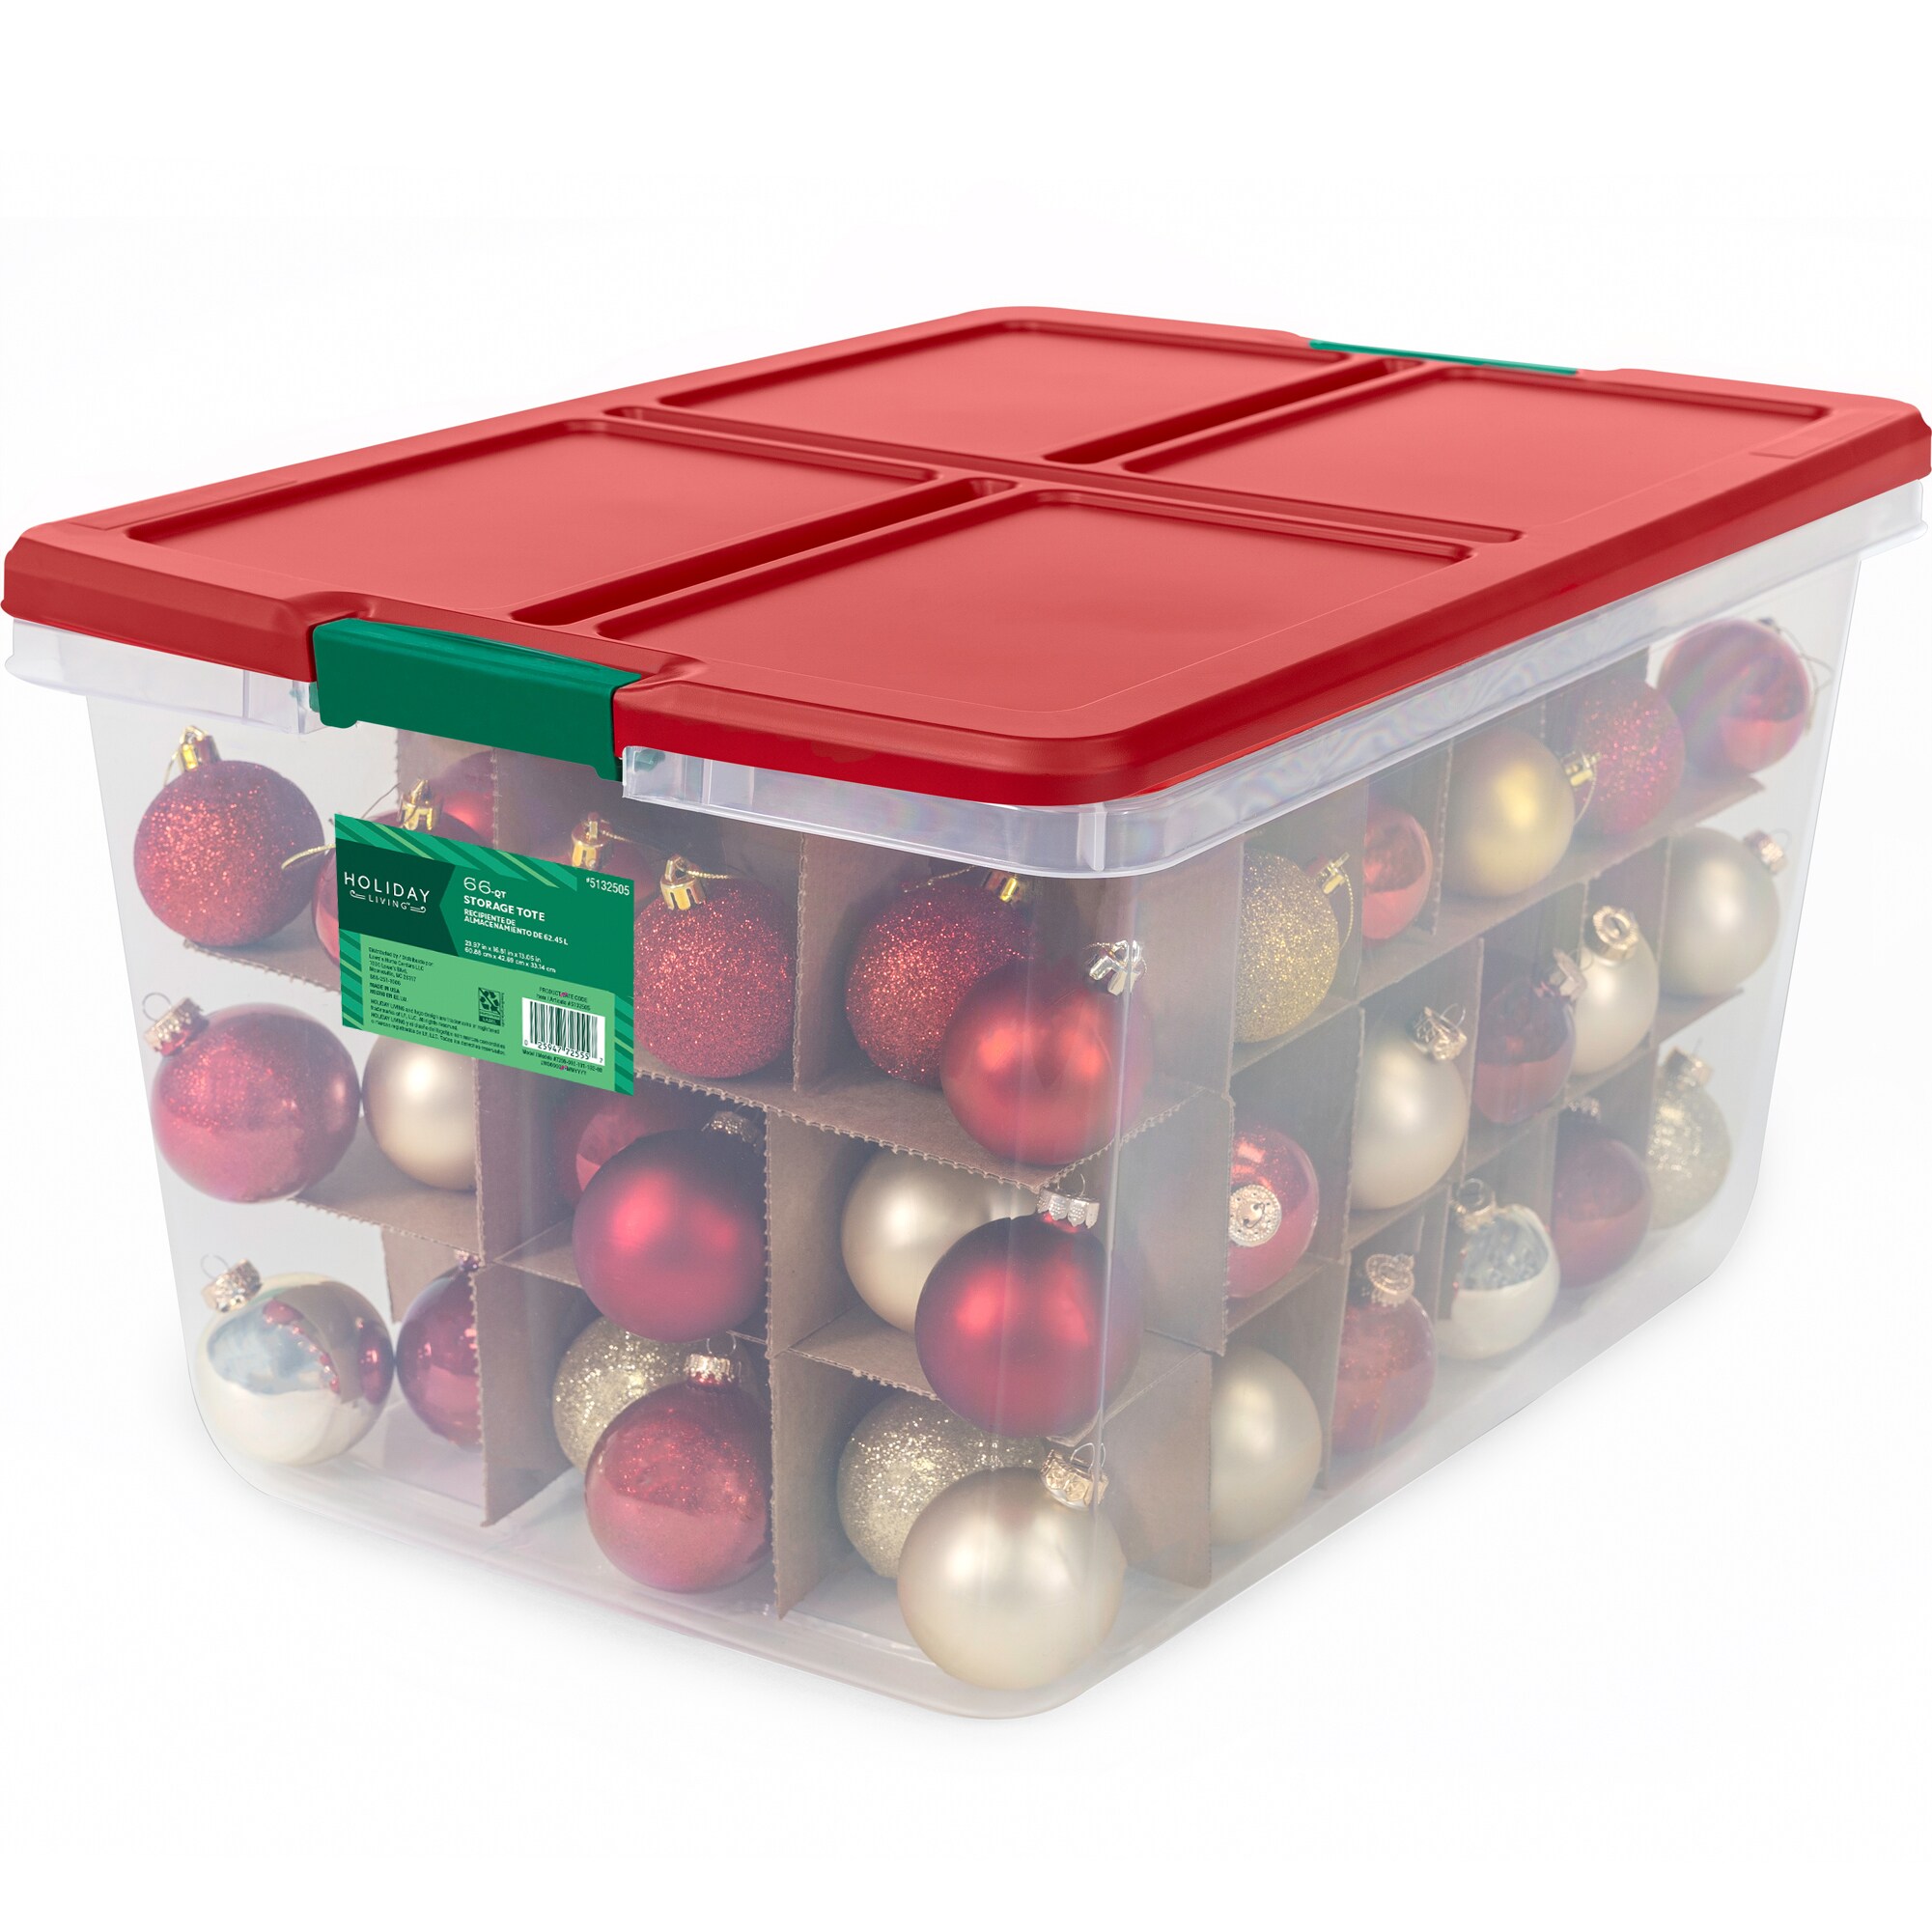 Holiday Living Baskets & Storage Containers at